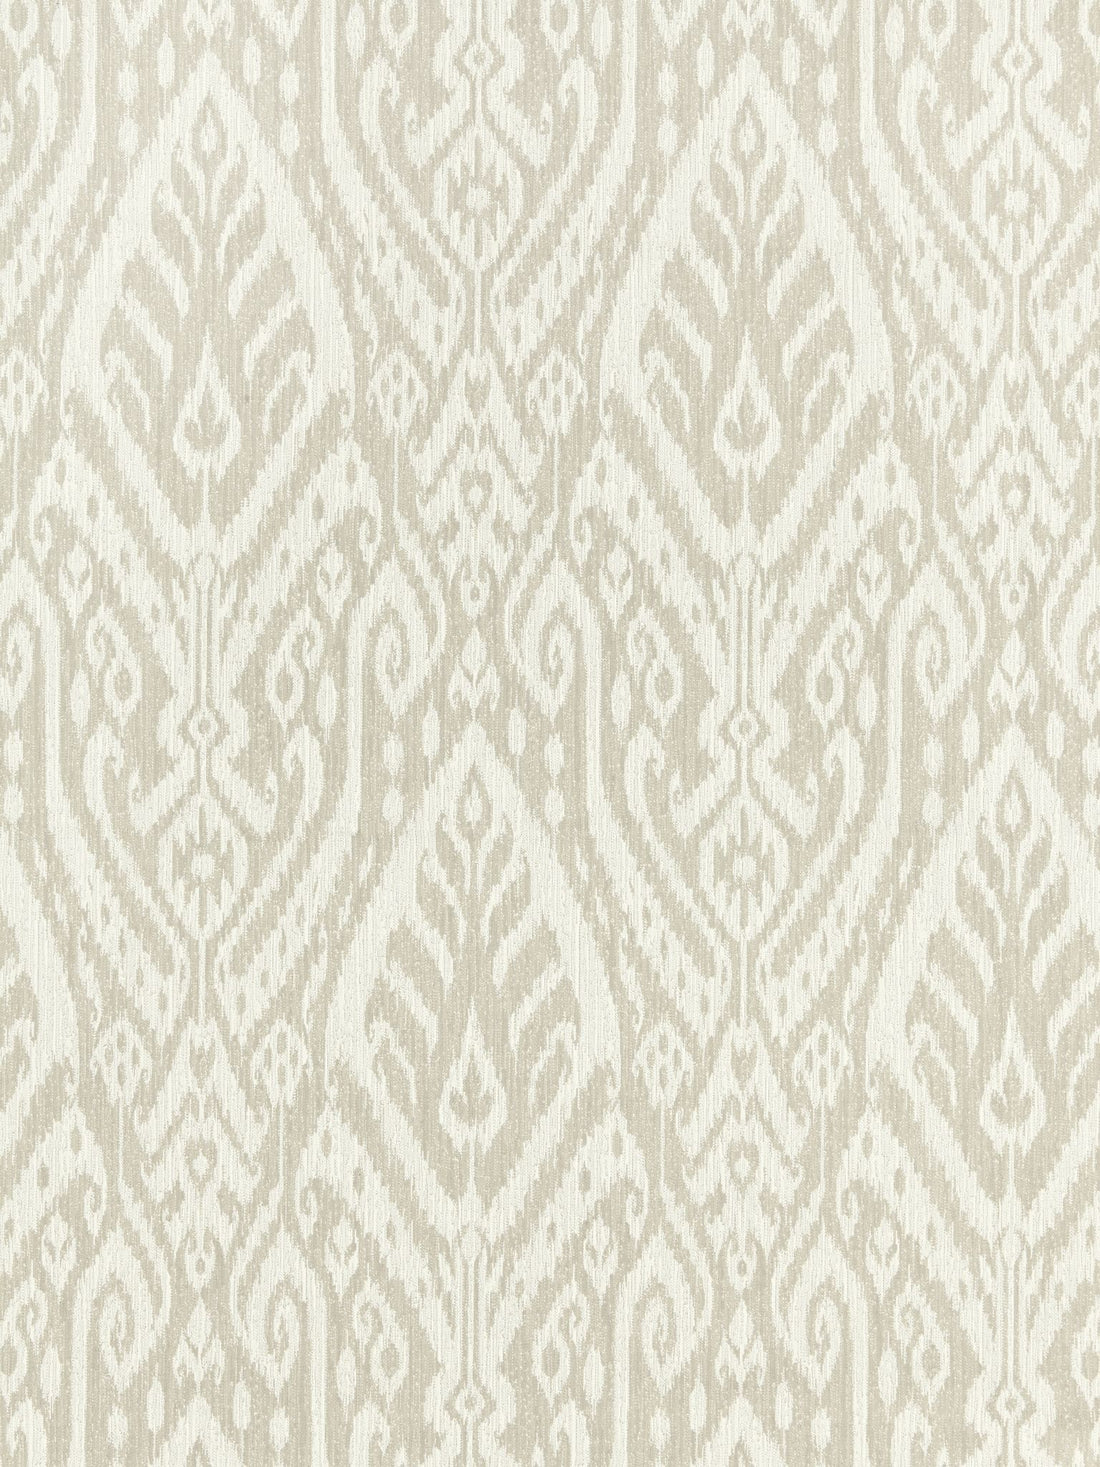 Borneo Ikat fabric in linen color - pattern number SC 000127196 - by Scalamandre in the Scalamandre Fabrics Book 1 collection